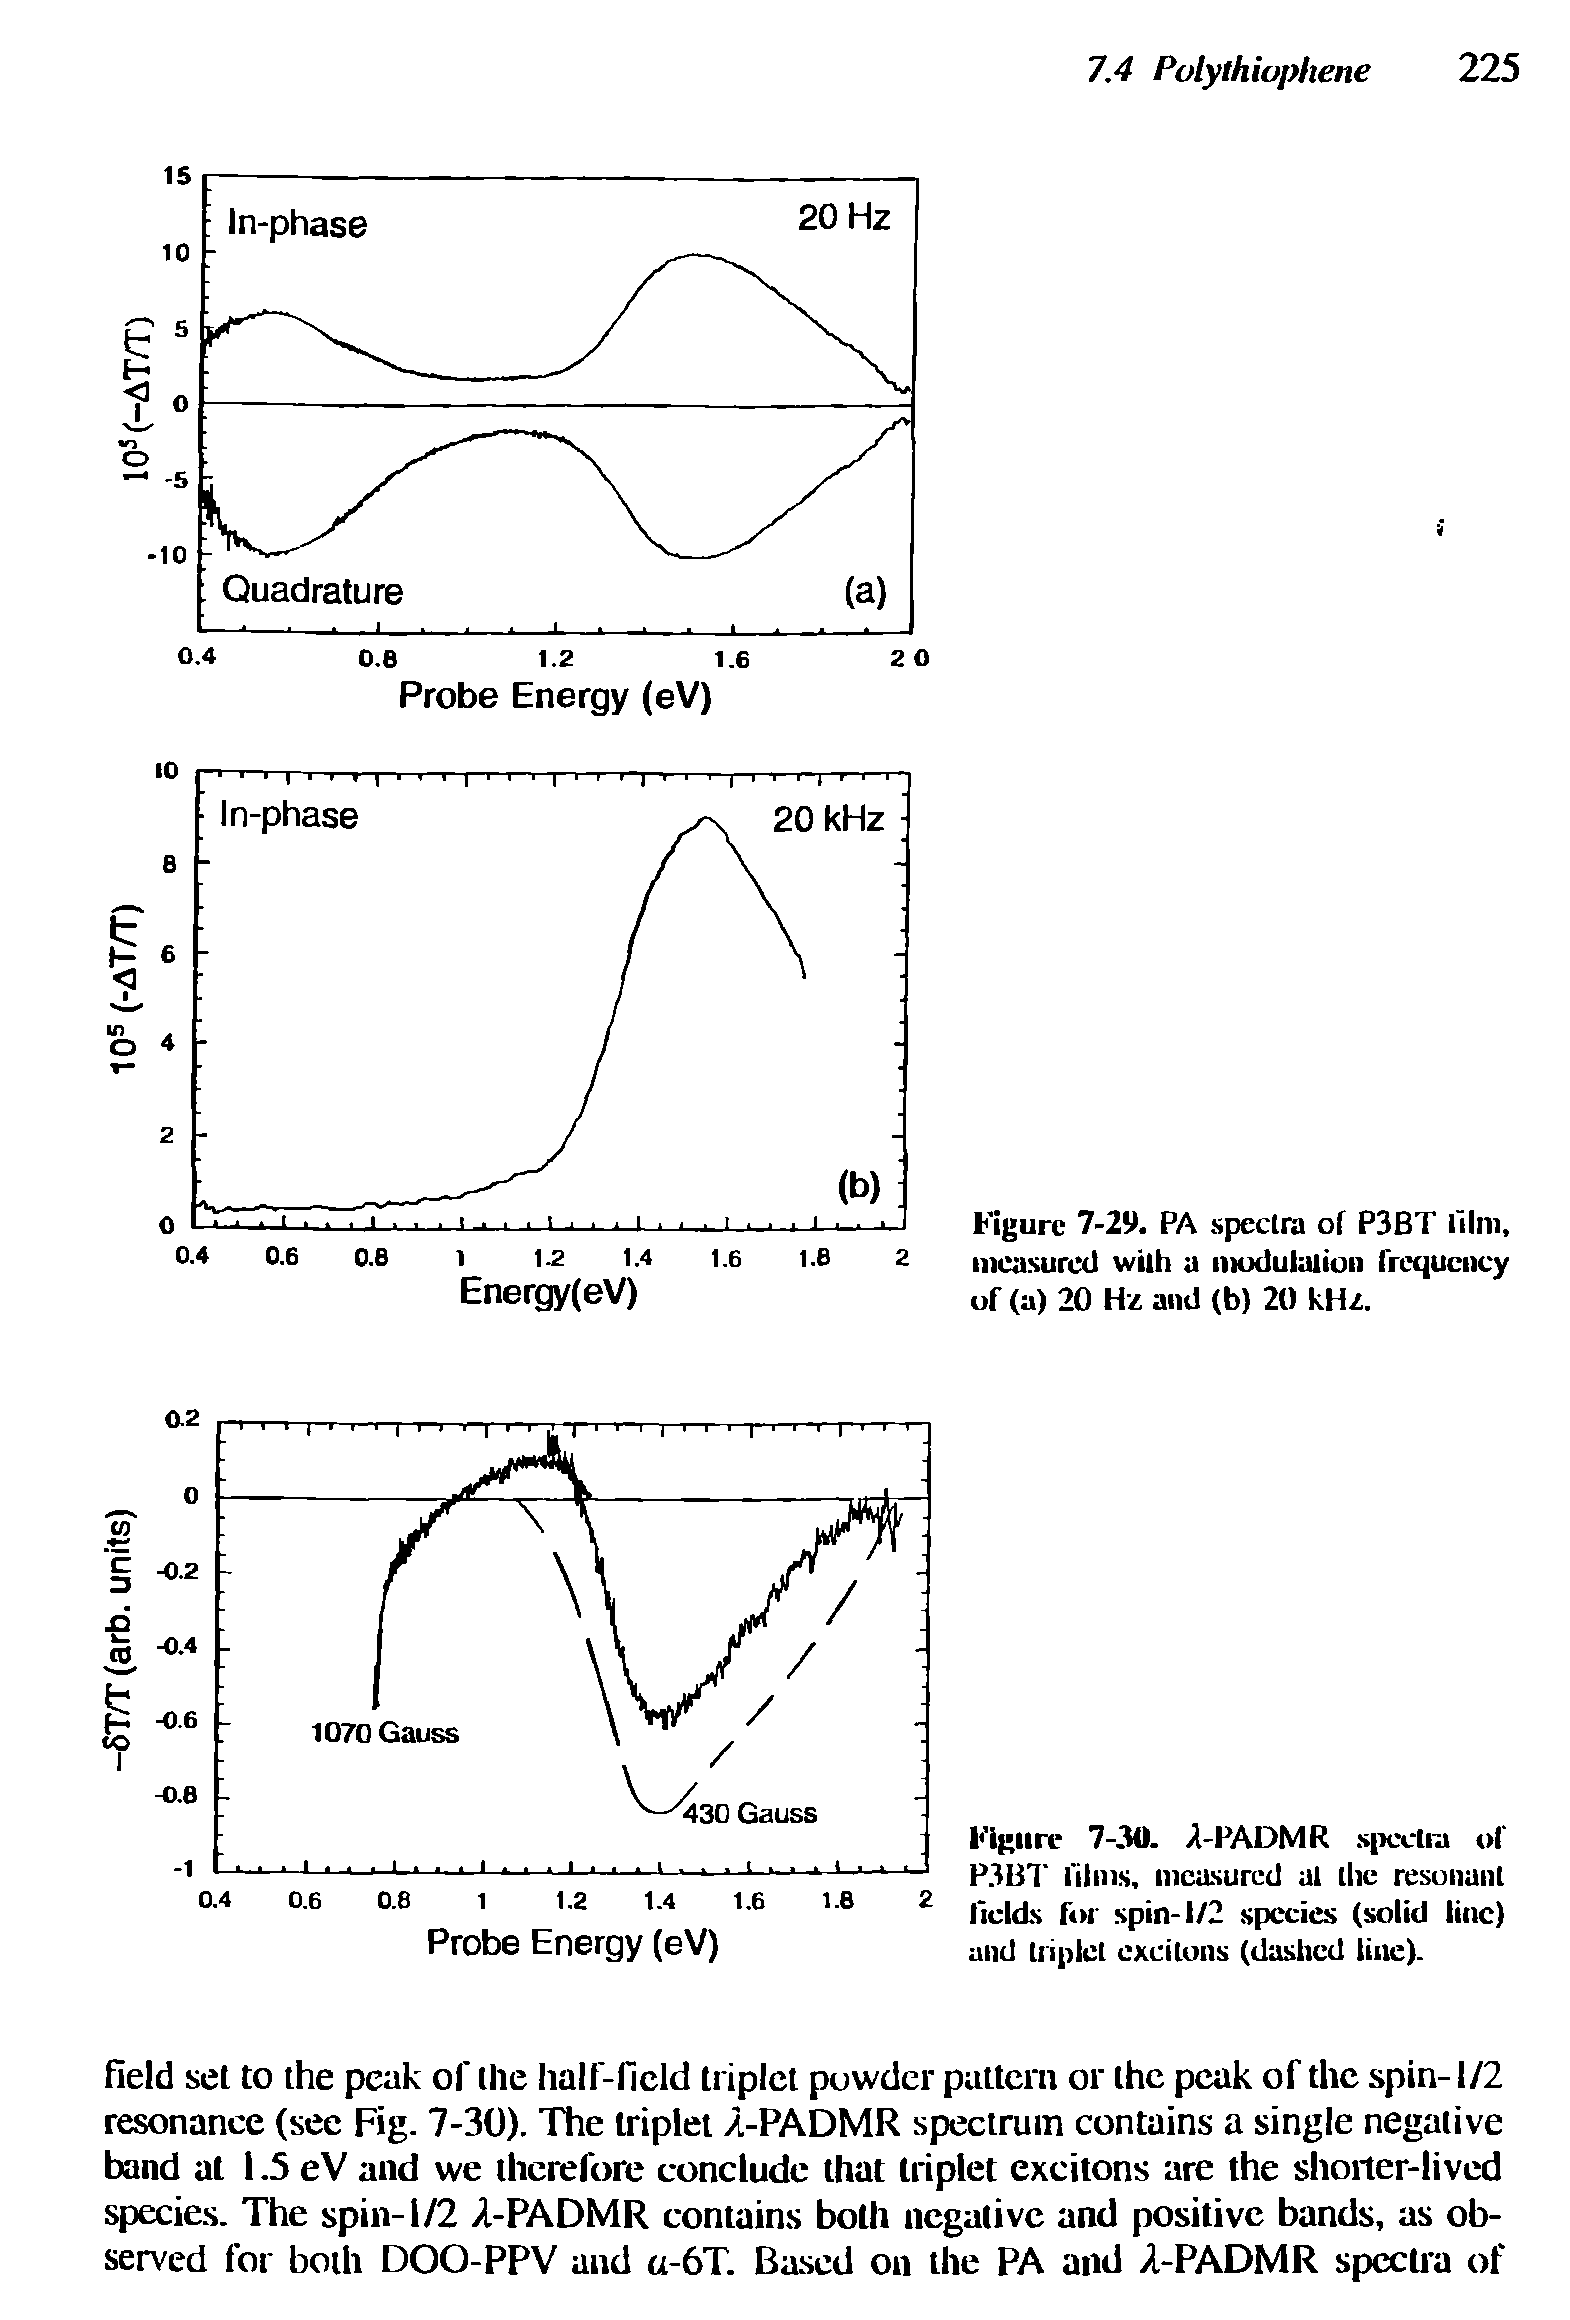 Figure 7-30. A-PADMR spectra of P3UT films, measured at [lie resonant fields for spin-1/2 species (solid line) and triplet excitons (dashed line).